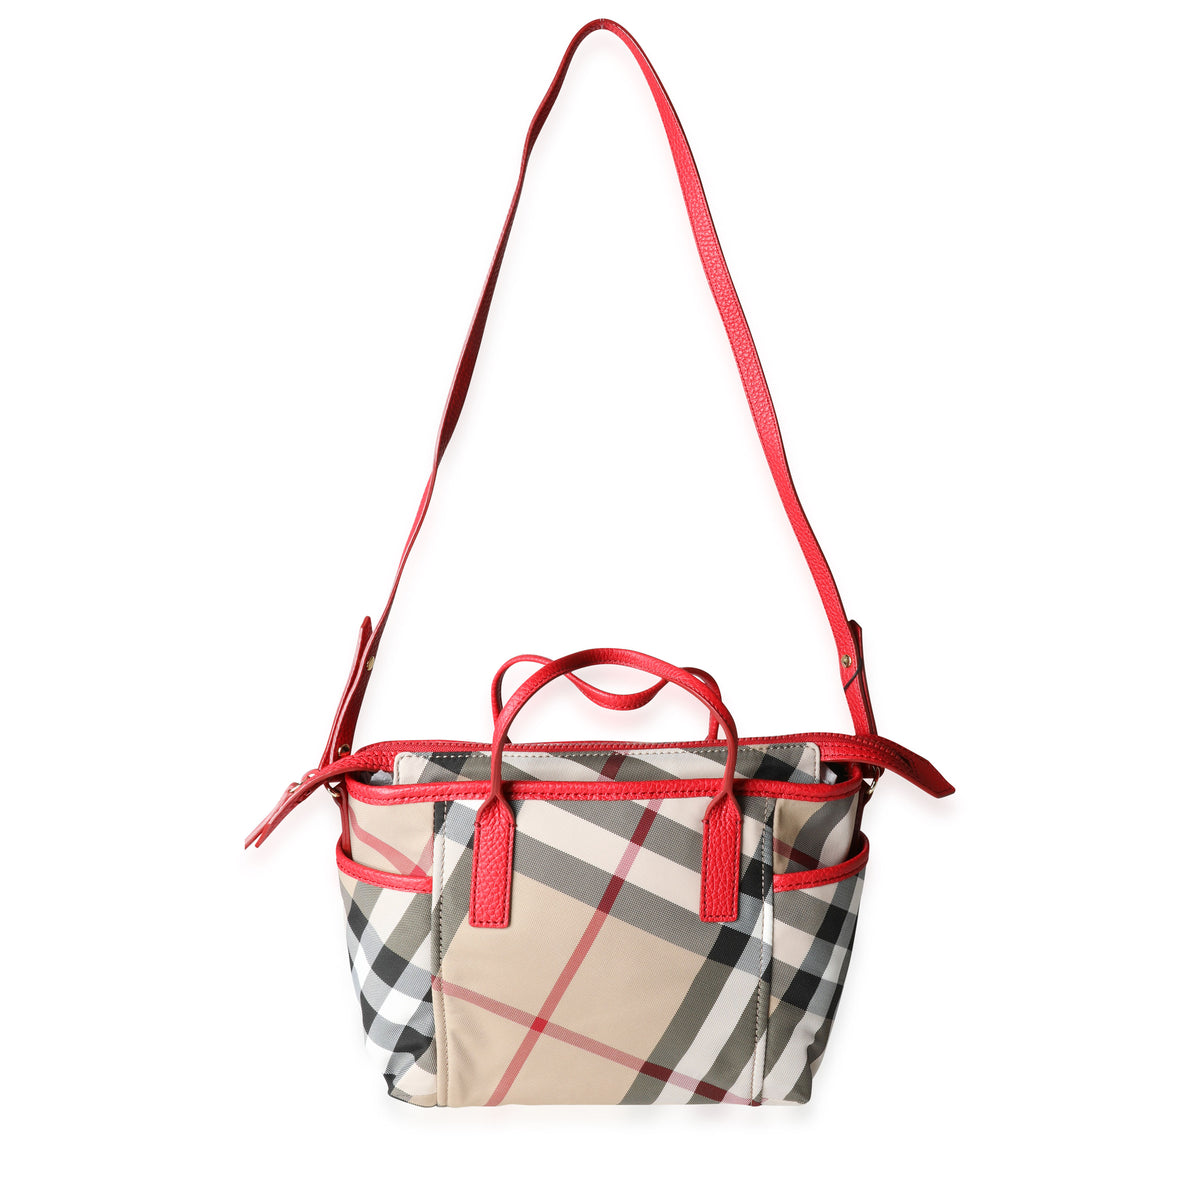 Burberry Exploded Check Canvas & Bright Rose Grained Leather Top Handle Tote